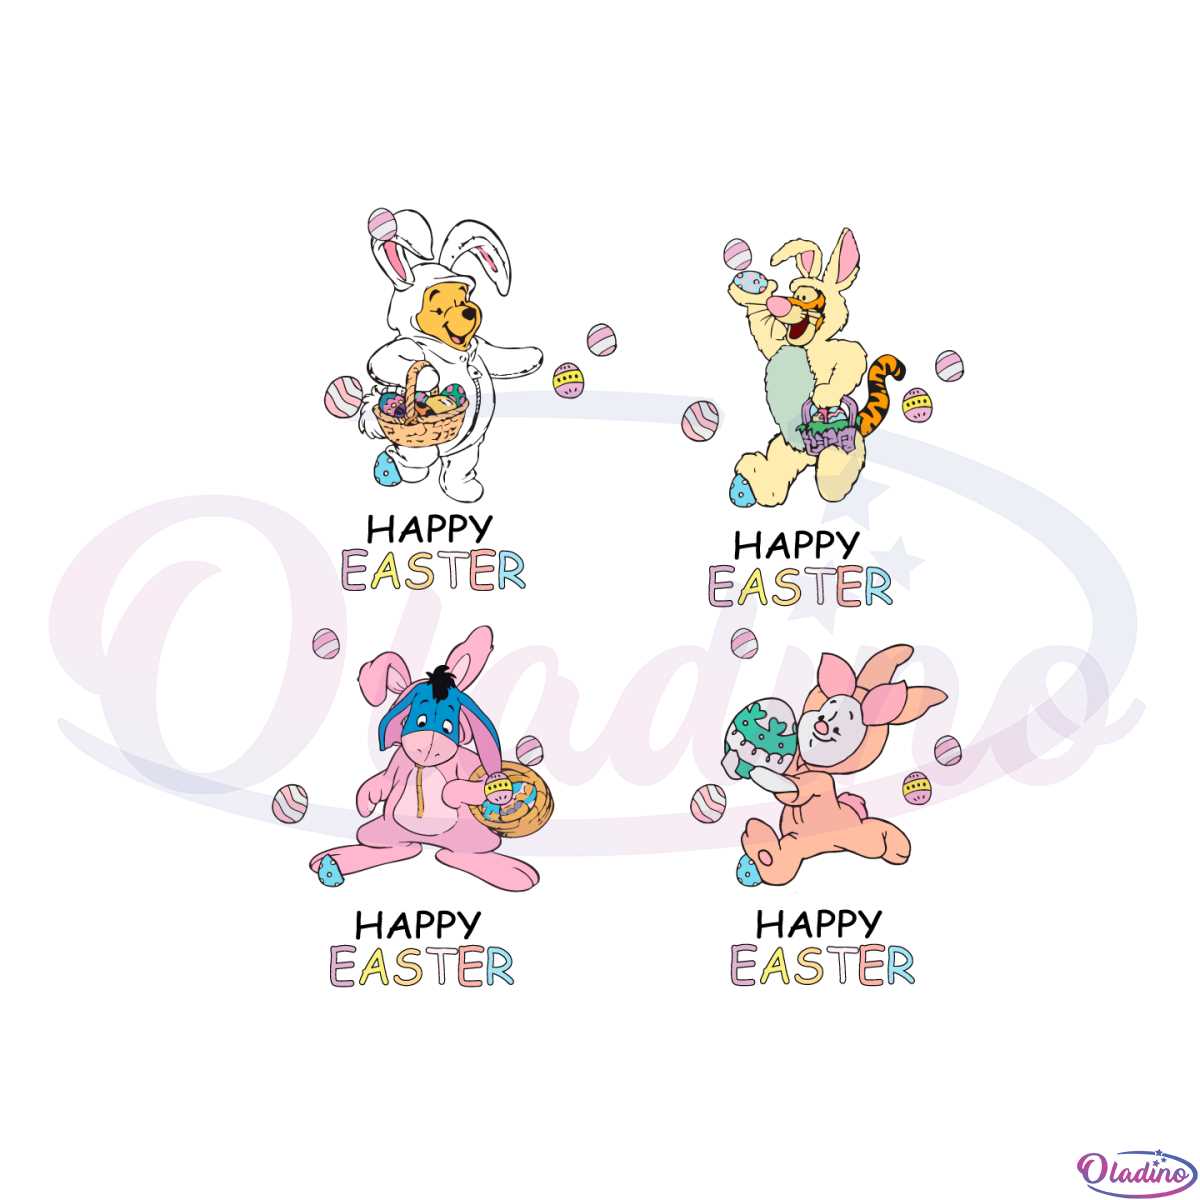 happy-easter-day-winnie-the-pooh-and-friend-easter-bunny-cosplay-svg